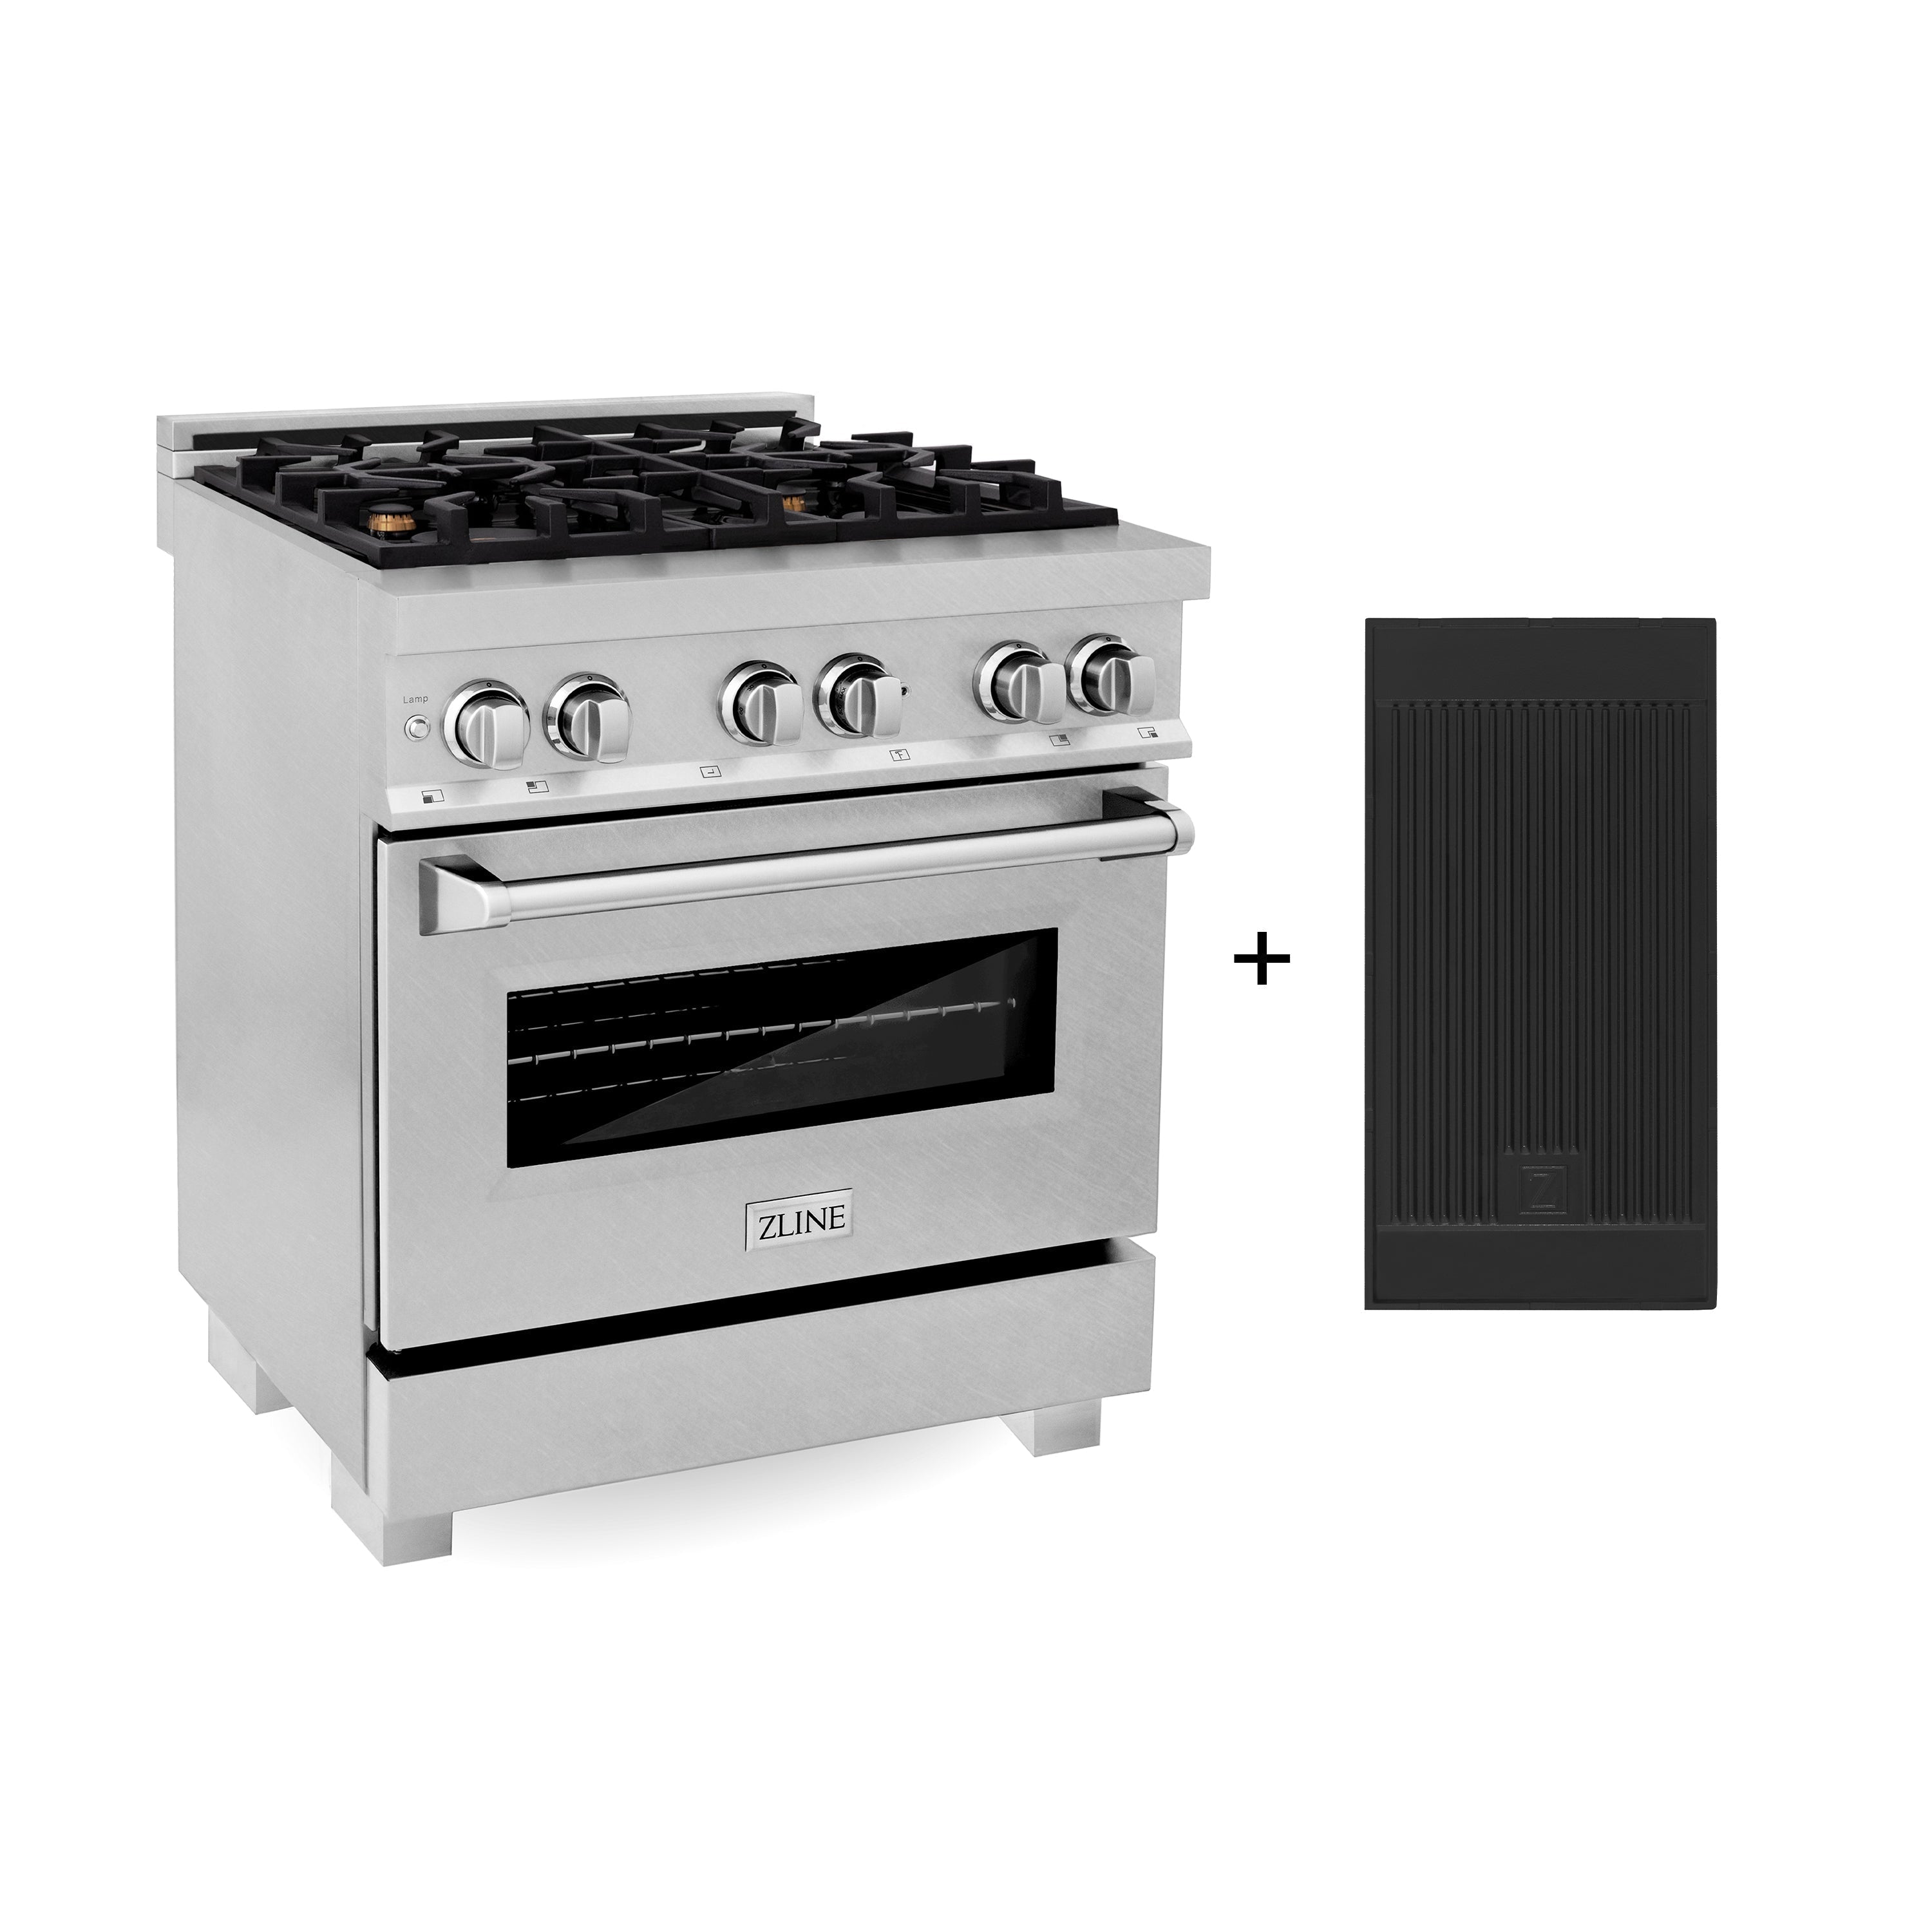 ZLINE 30" 4.0 cu. ft. Electric Oven and Gas Cooktop Dual Fuel Range with Griddle and Brass Burners in Fingerprint Resistant Stainless (RAS-SN-BR-GR-30)